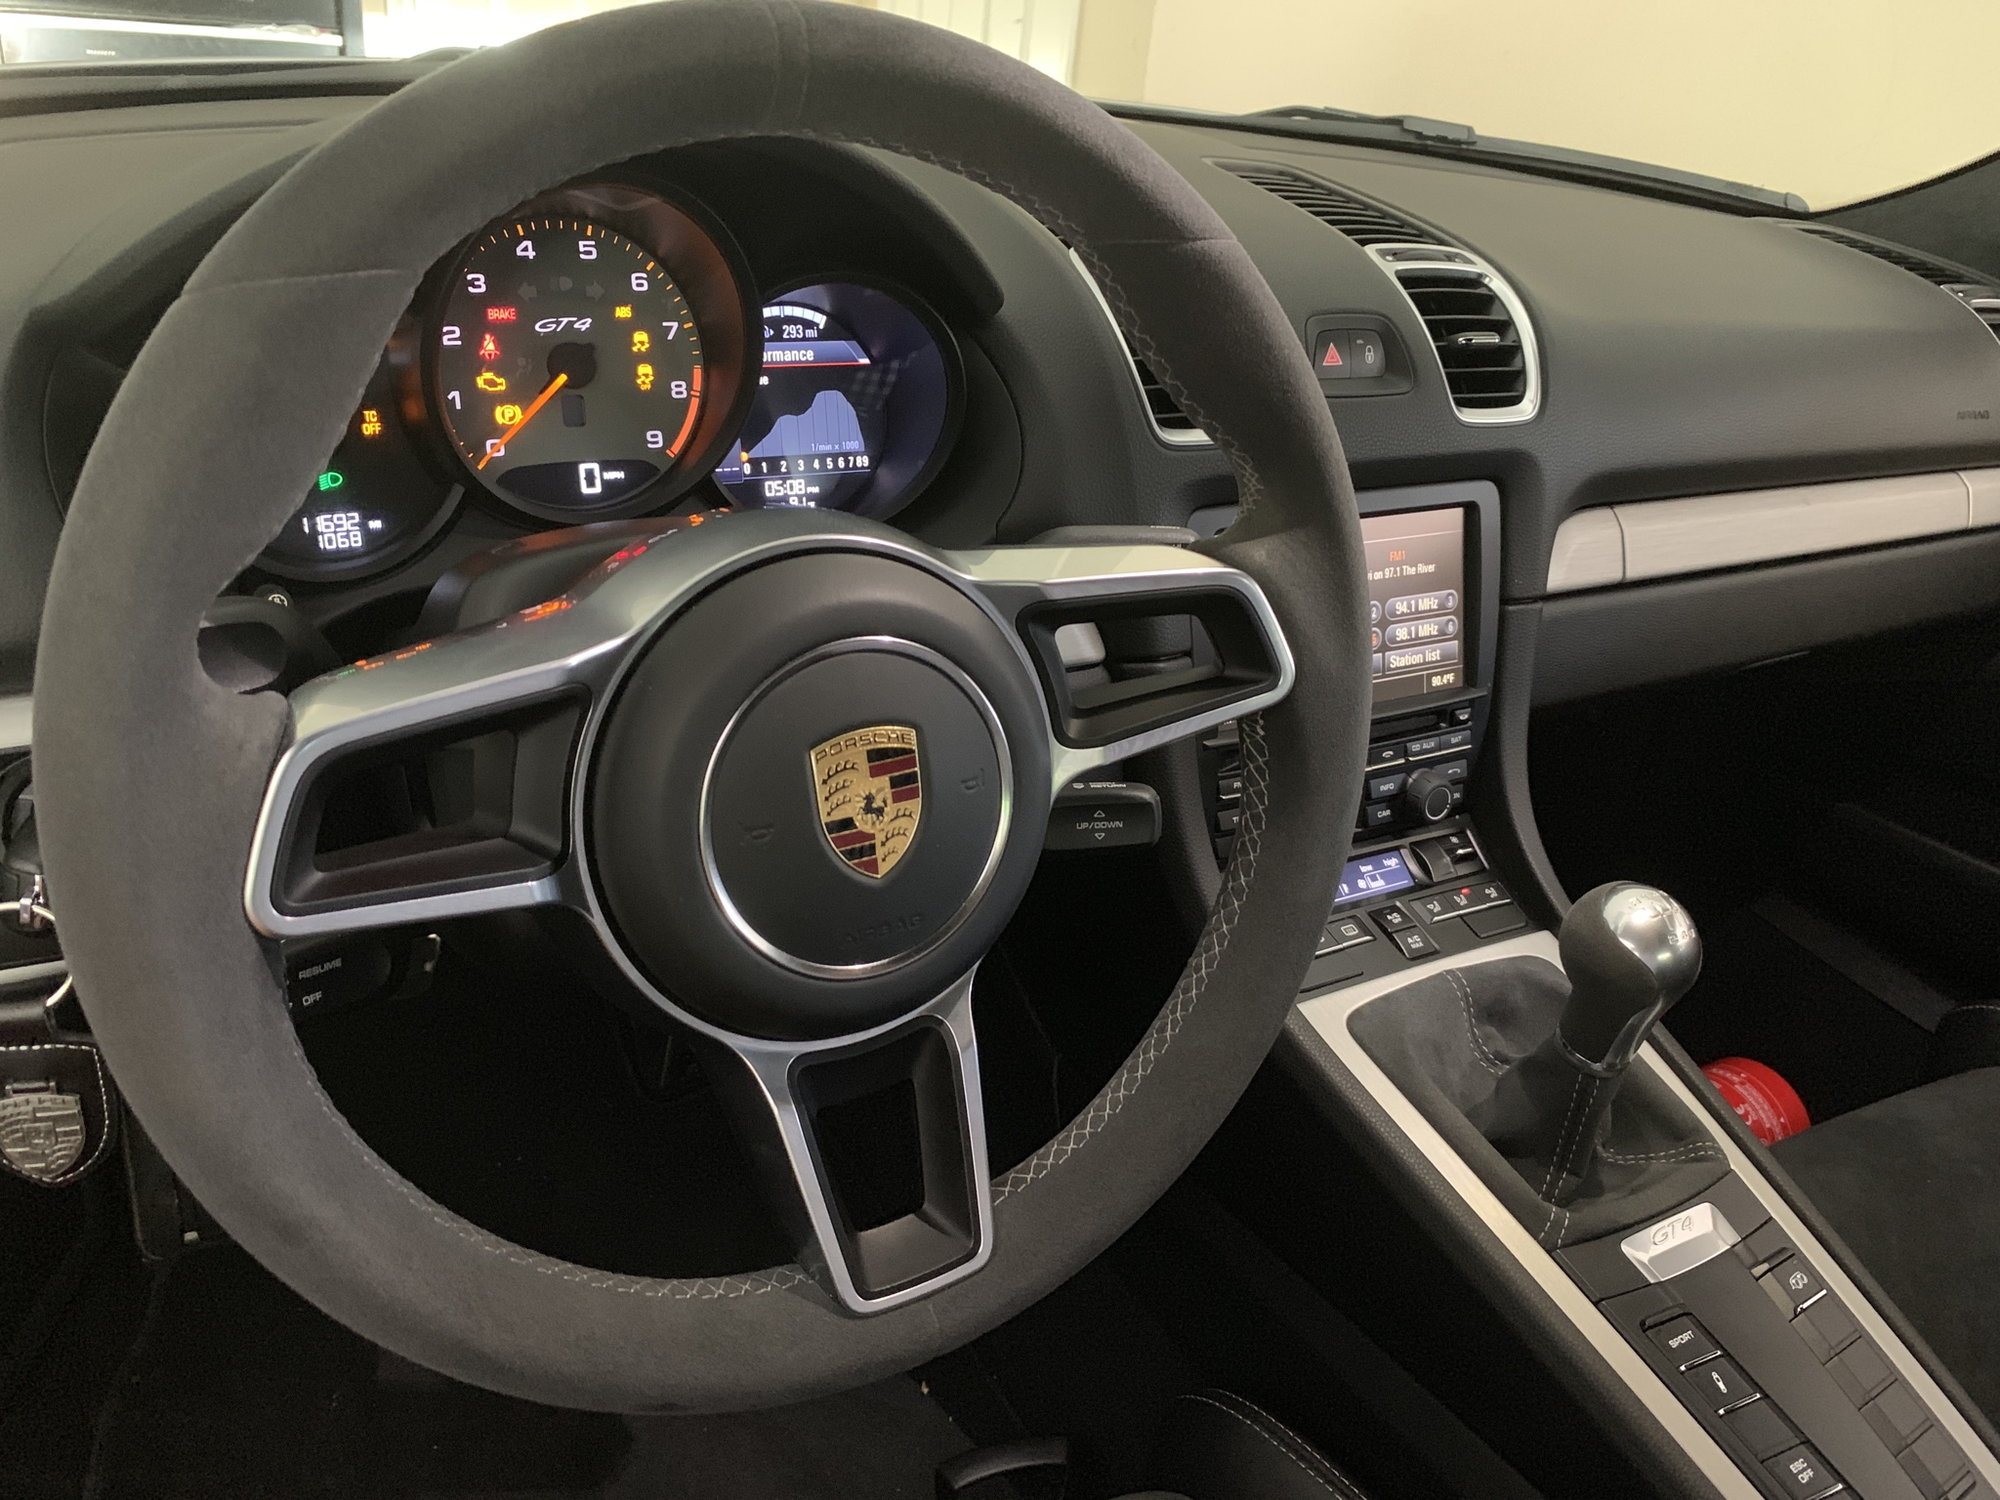 Steering/Suspension - WTB or Want to Trade for GT4 leather steering wheel instead of alcantera - Used - 2016 to 2017 Porsche Cayman GT4 - Buford, GA 30519, United States